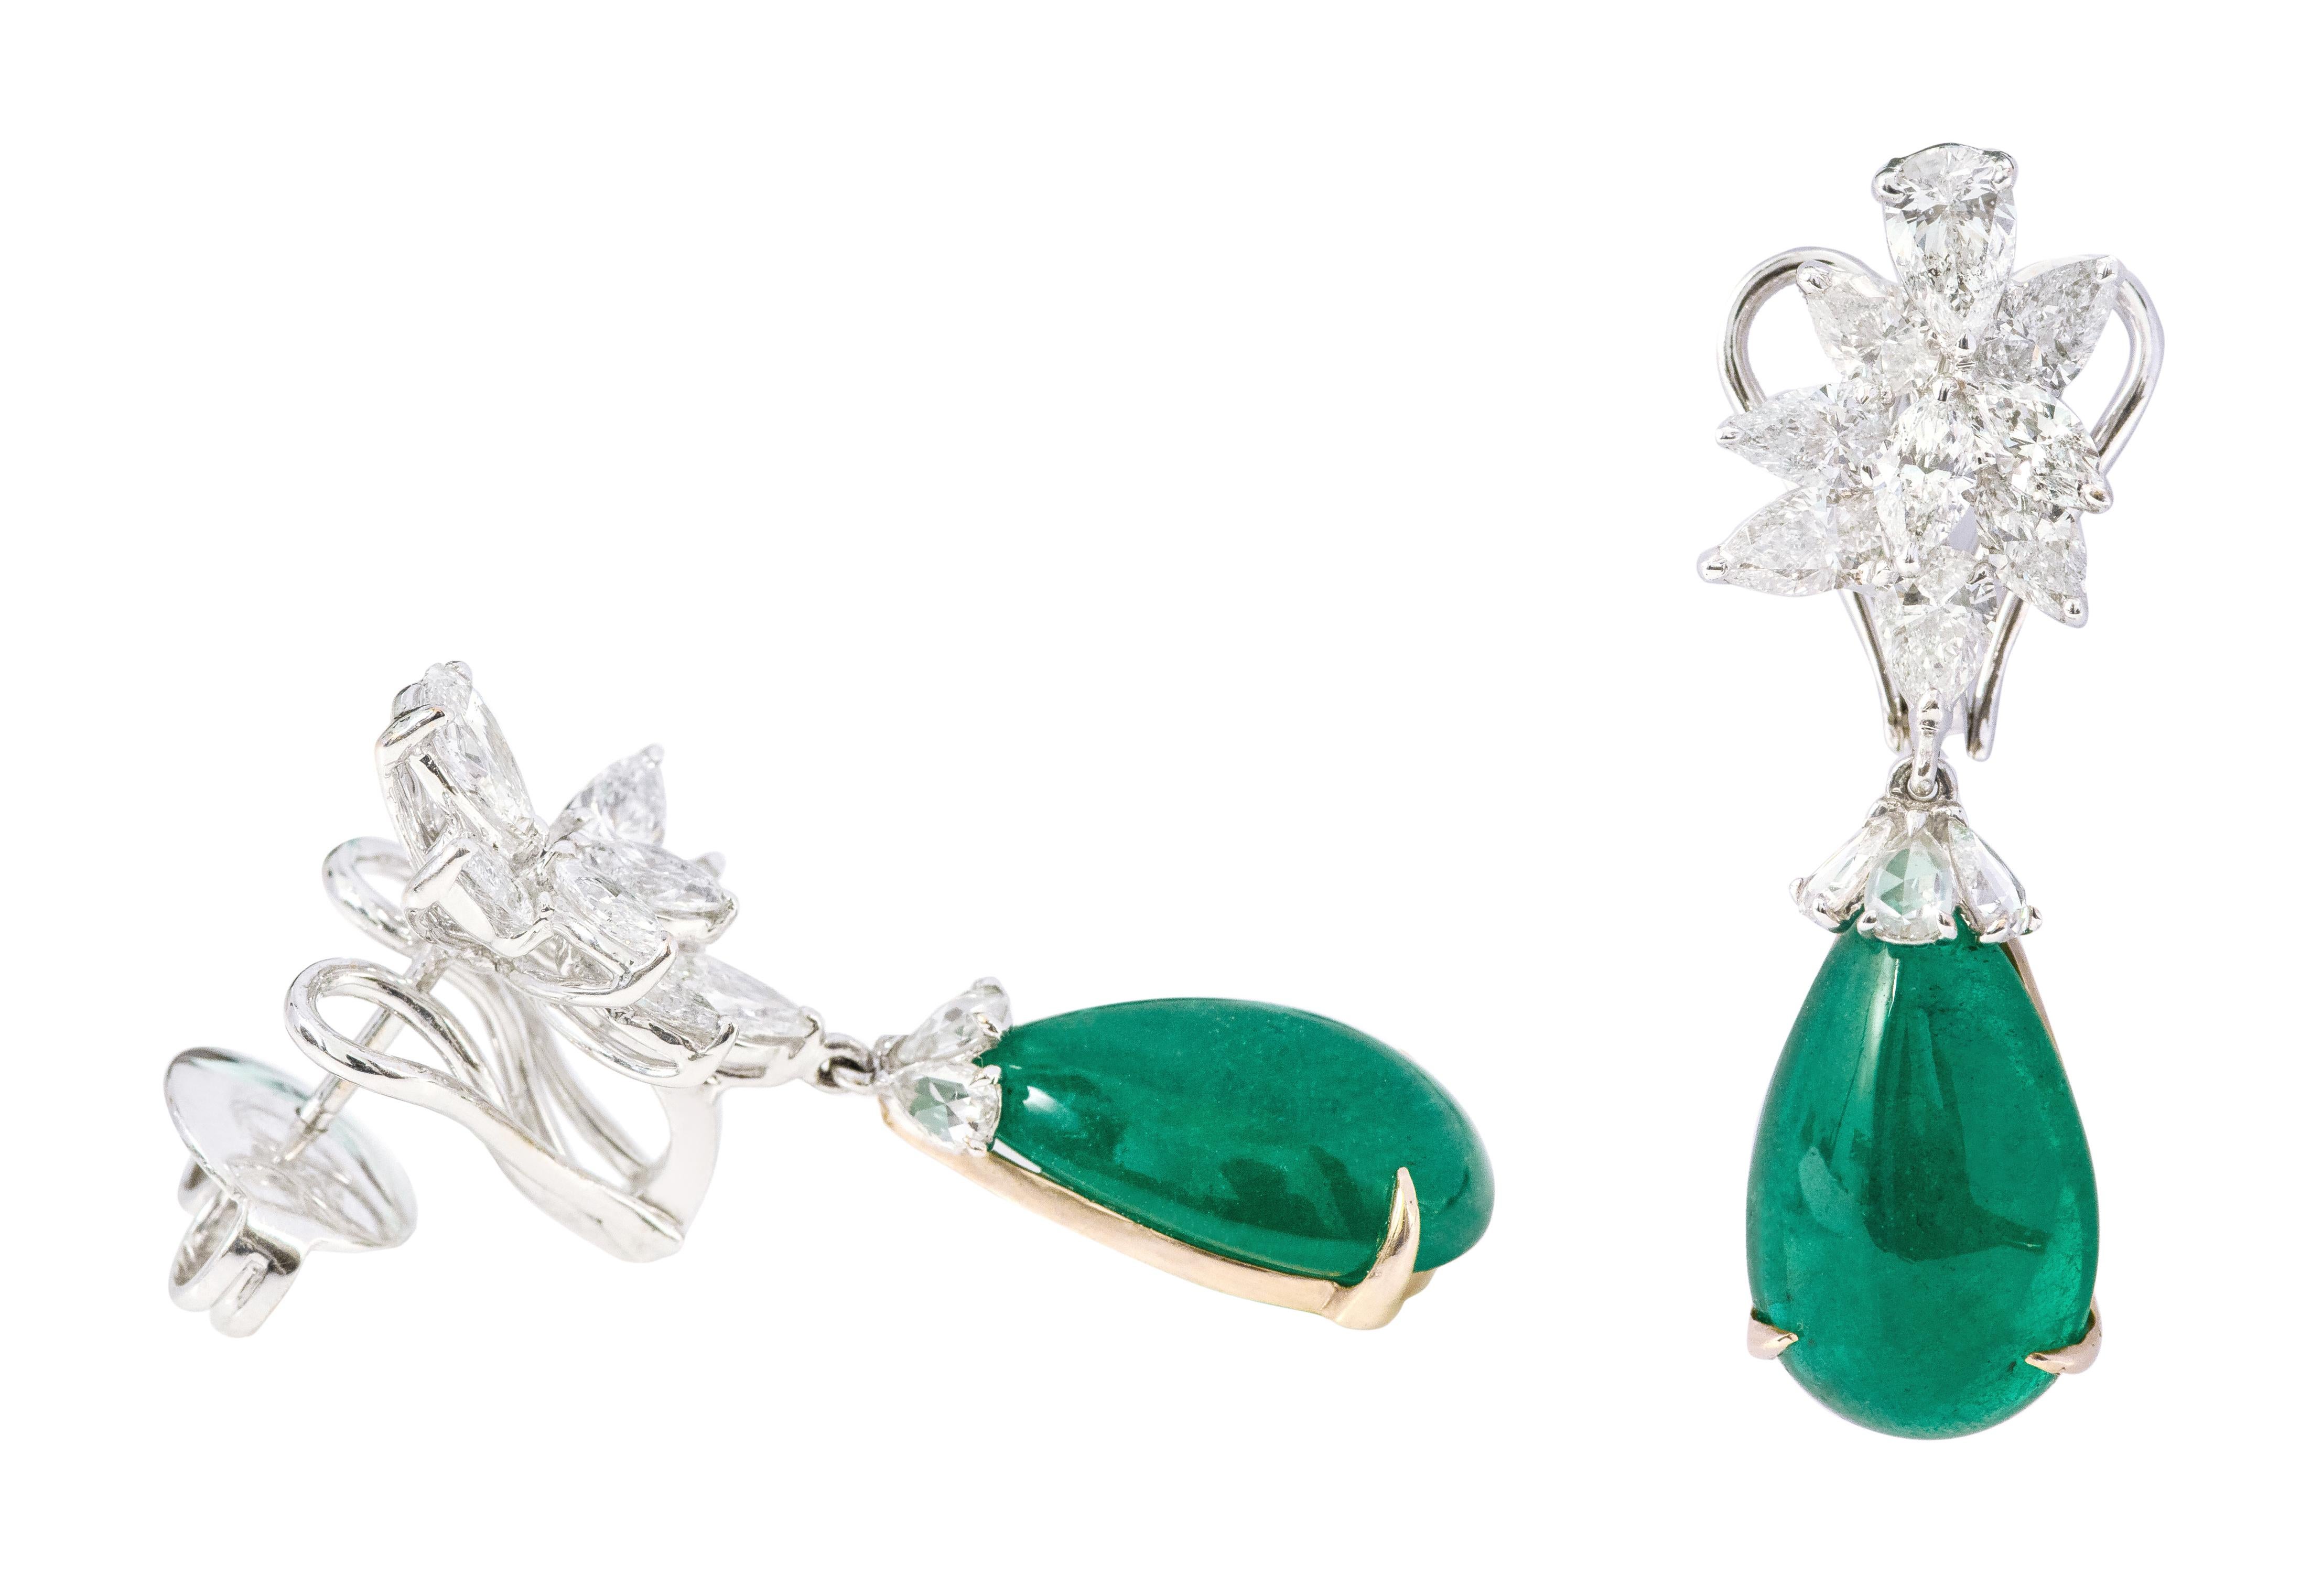 18 Karat White Gold 18.66 Carats Natural Emerald and Diamond Drop Earrings

This incredible dark green emerald and fancy shaped diamond earring is vividly magical. The solitaire pear emerald cabochon is amicably set with eagle prongs and rose cut